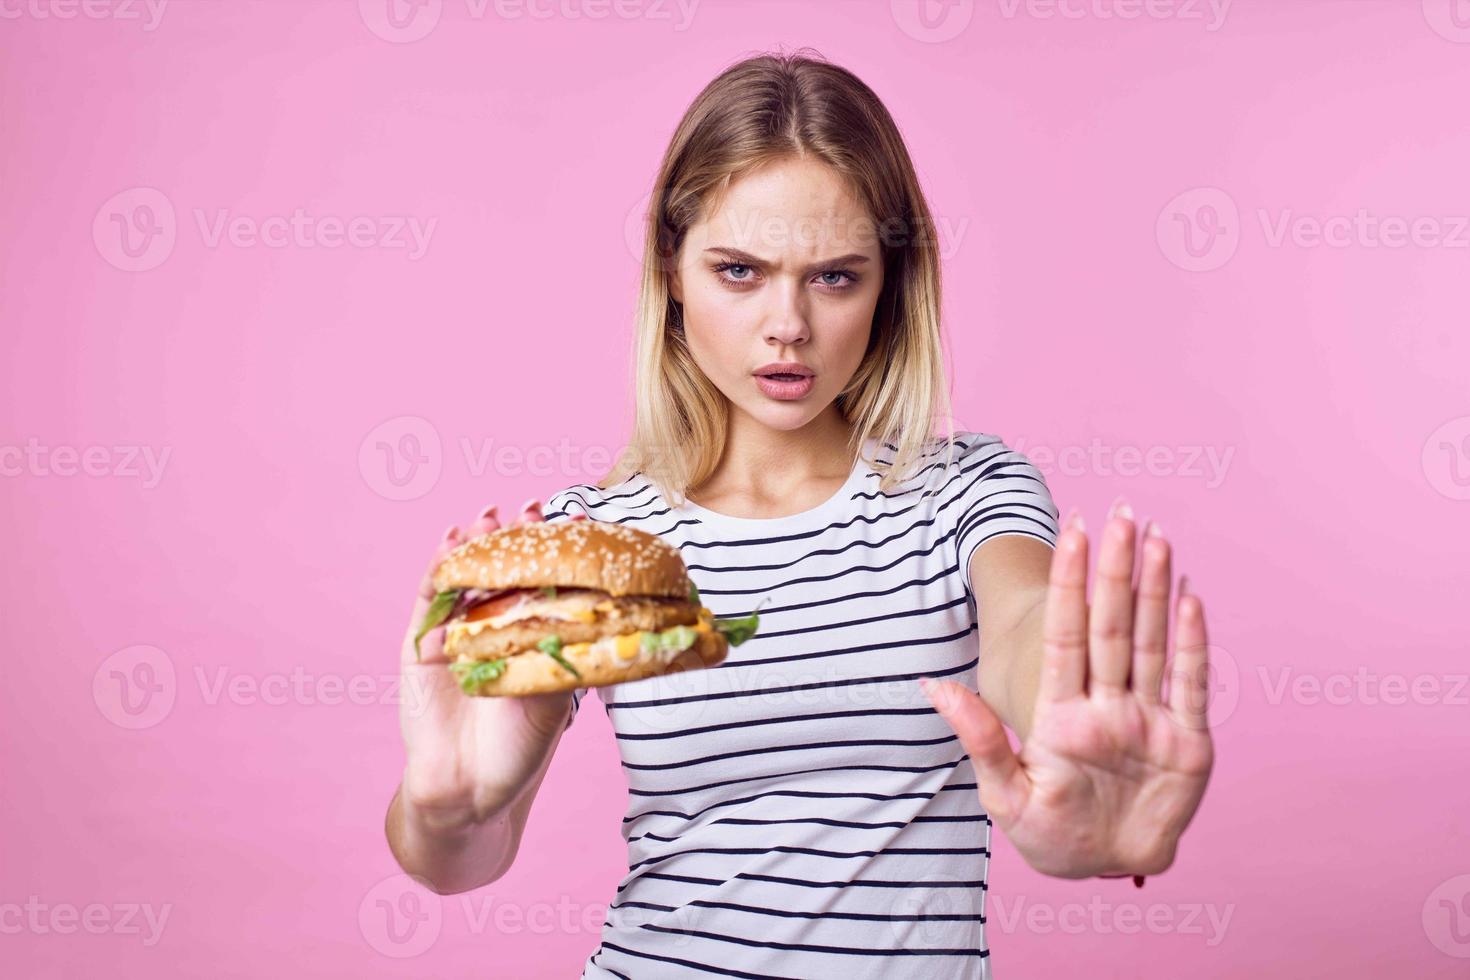 cute blonde girl in striped t-shirt hamburger close-up fast food lifestyle photo